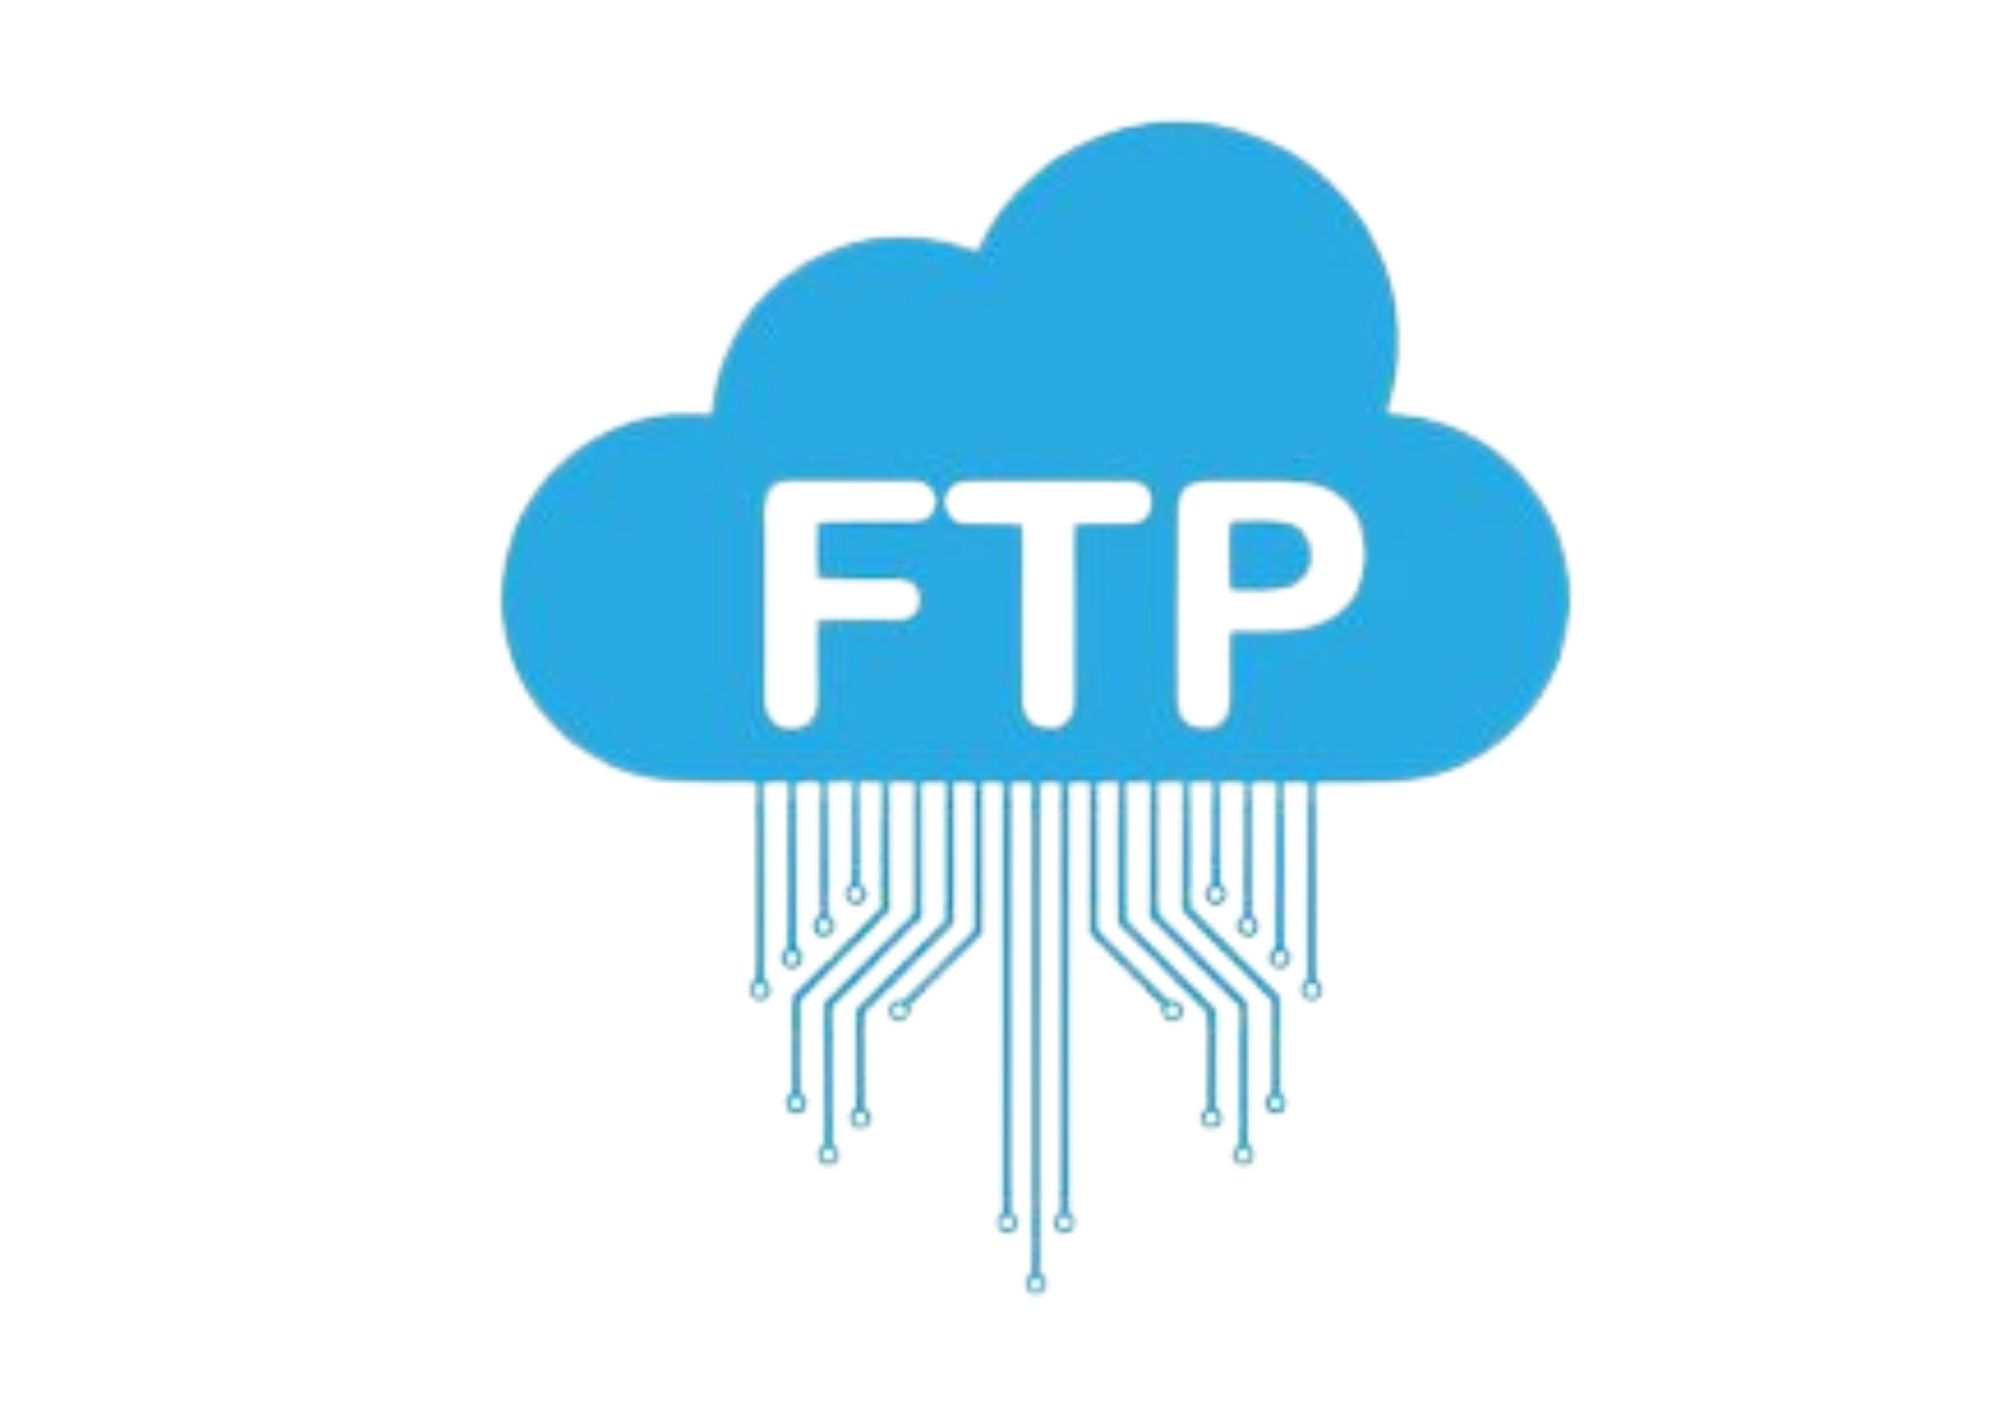 What Is FTP In Hindi, FTP Kya Hai In Hindi, FTP Full Form In Hindi